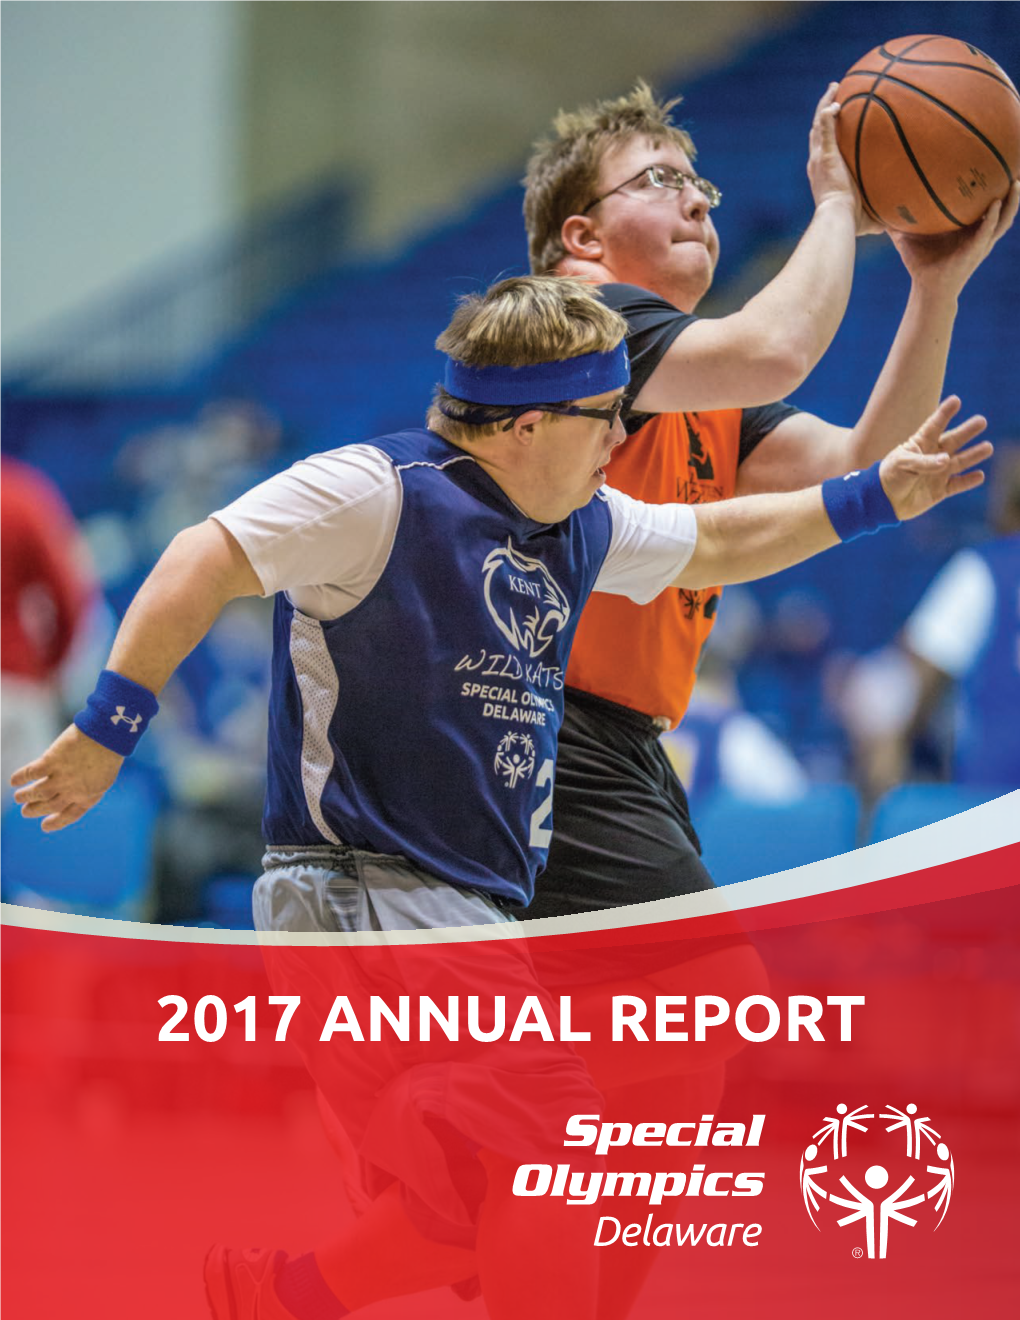 2017 ANNUAL REPORT Let Me Win